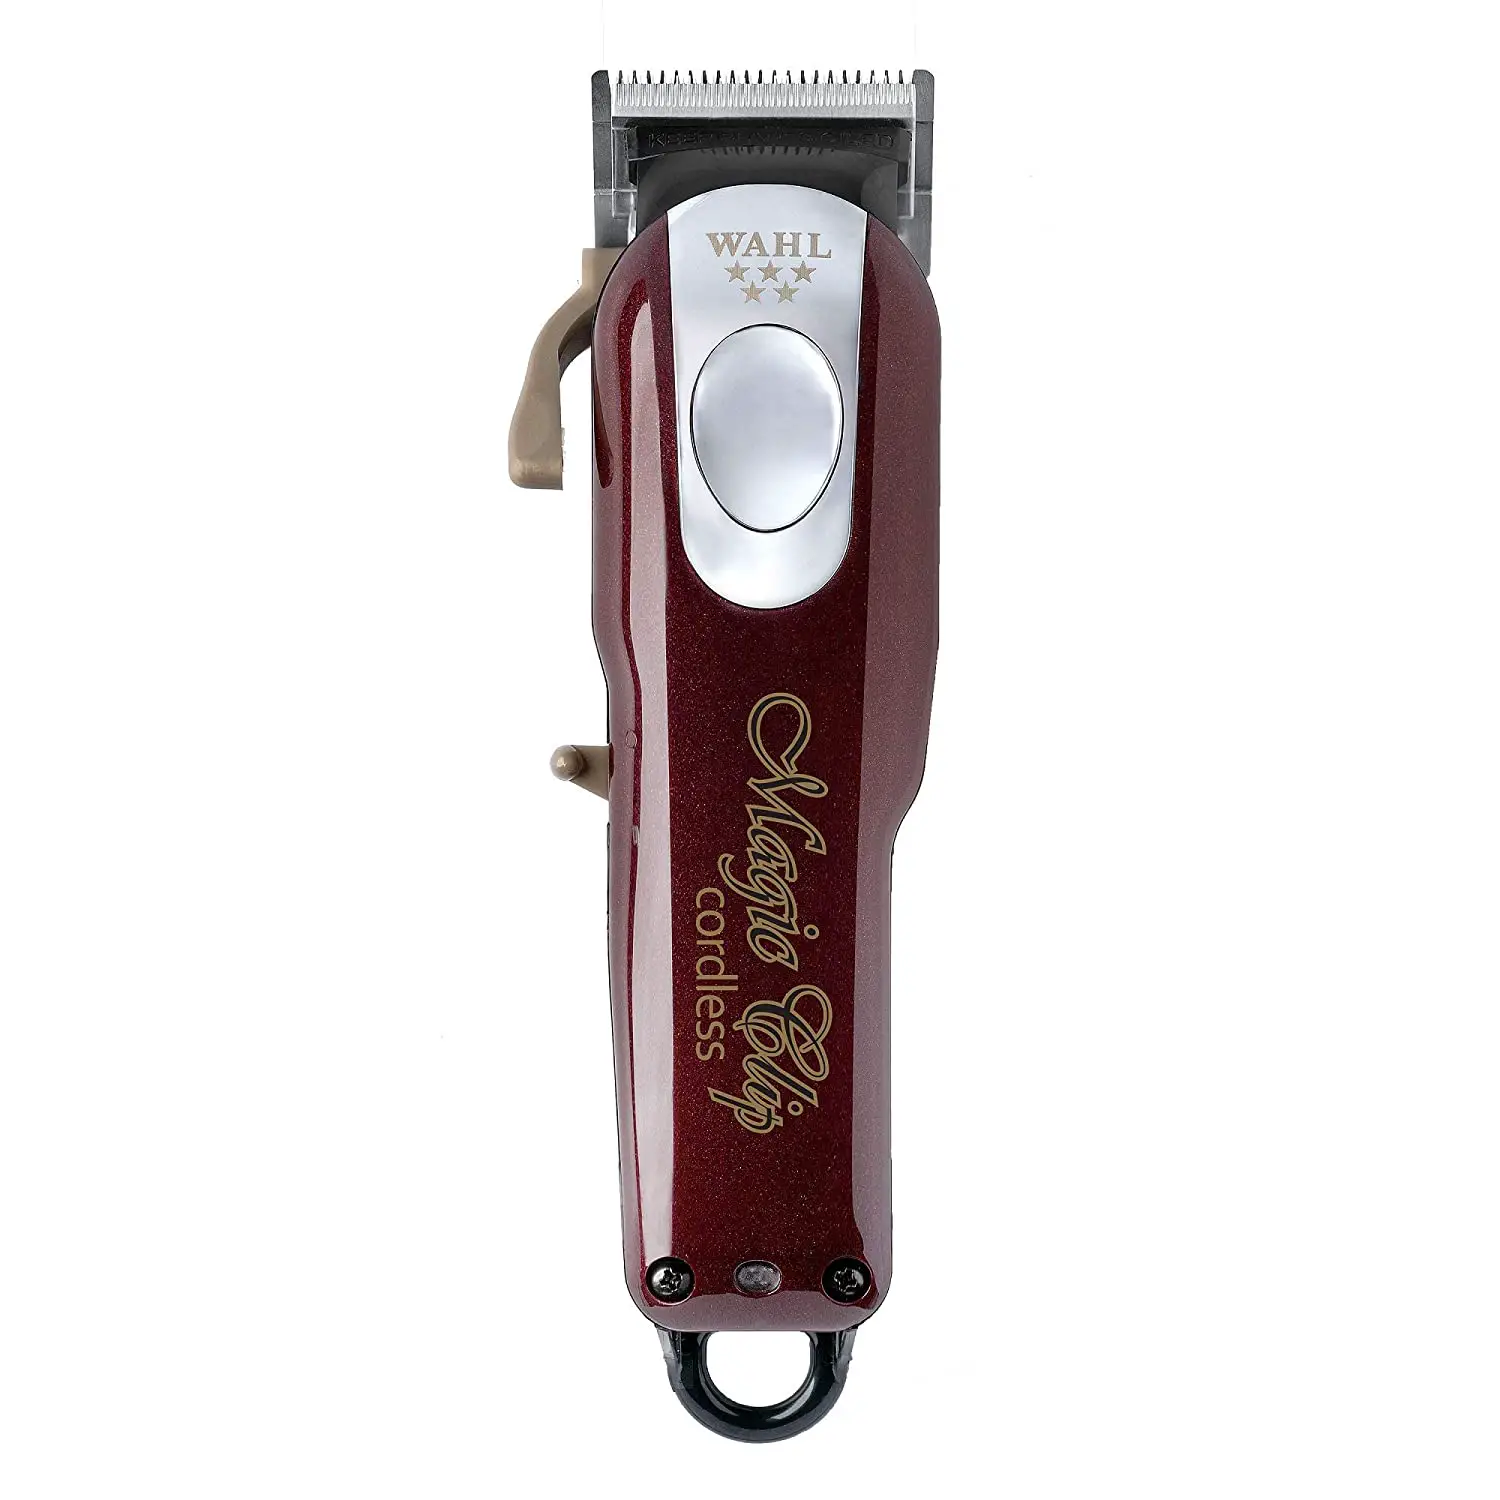 Wahl Professional - 5-Star Cord:Cordless Magic Clip best clippers for African American hair